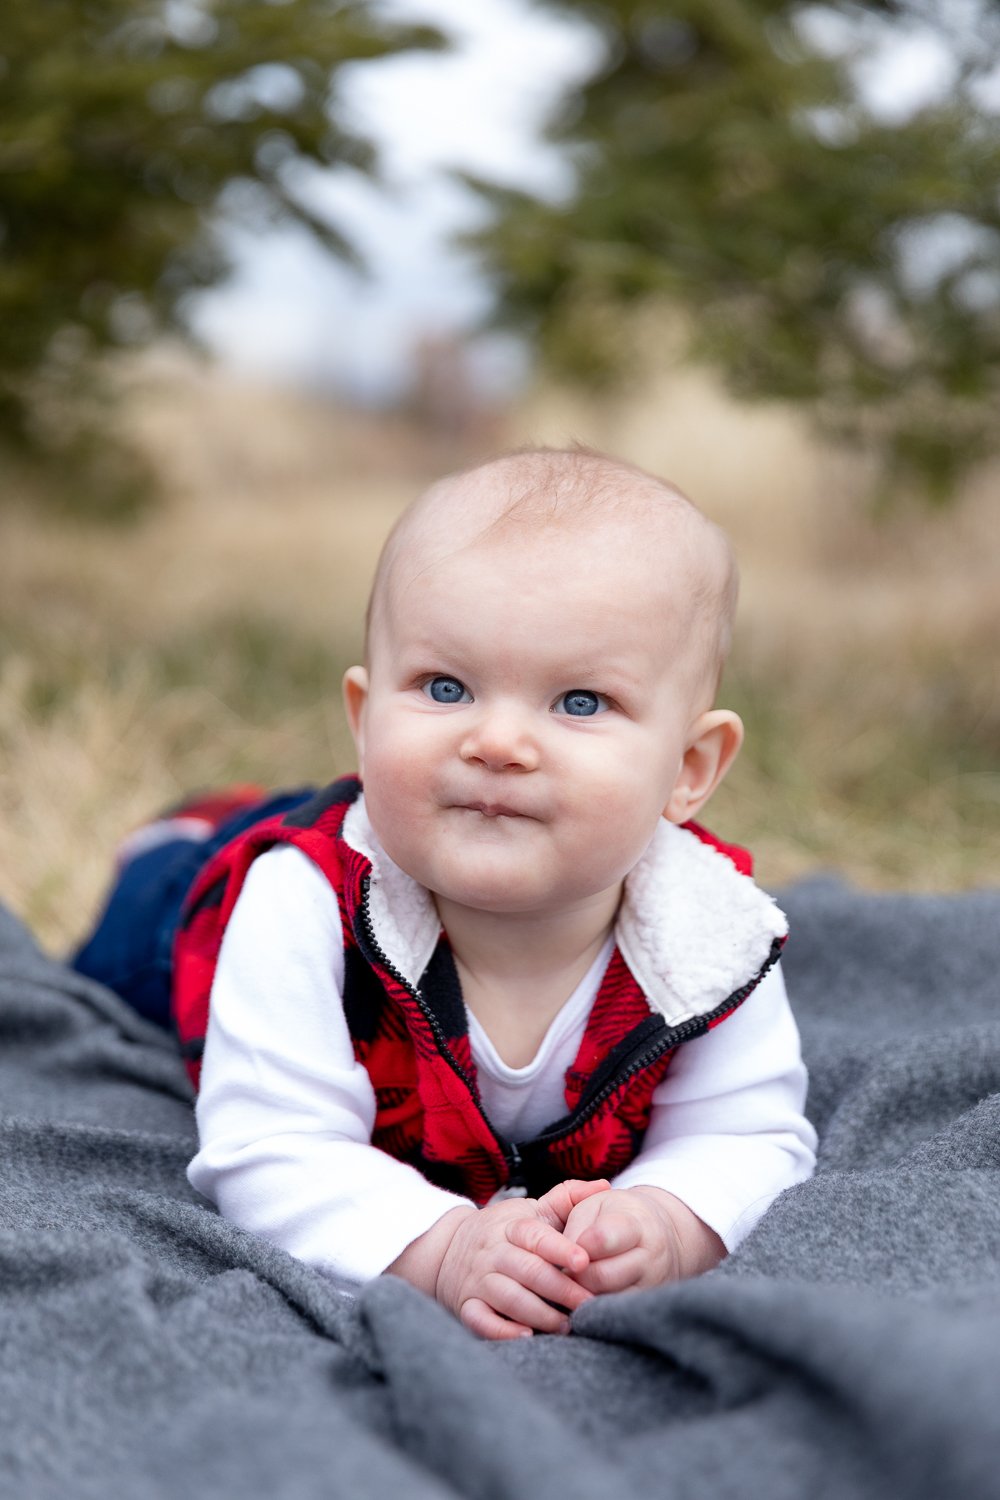 6 month baby laying down on a blanket while wearing a red and black plaid vest